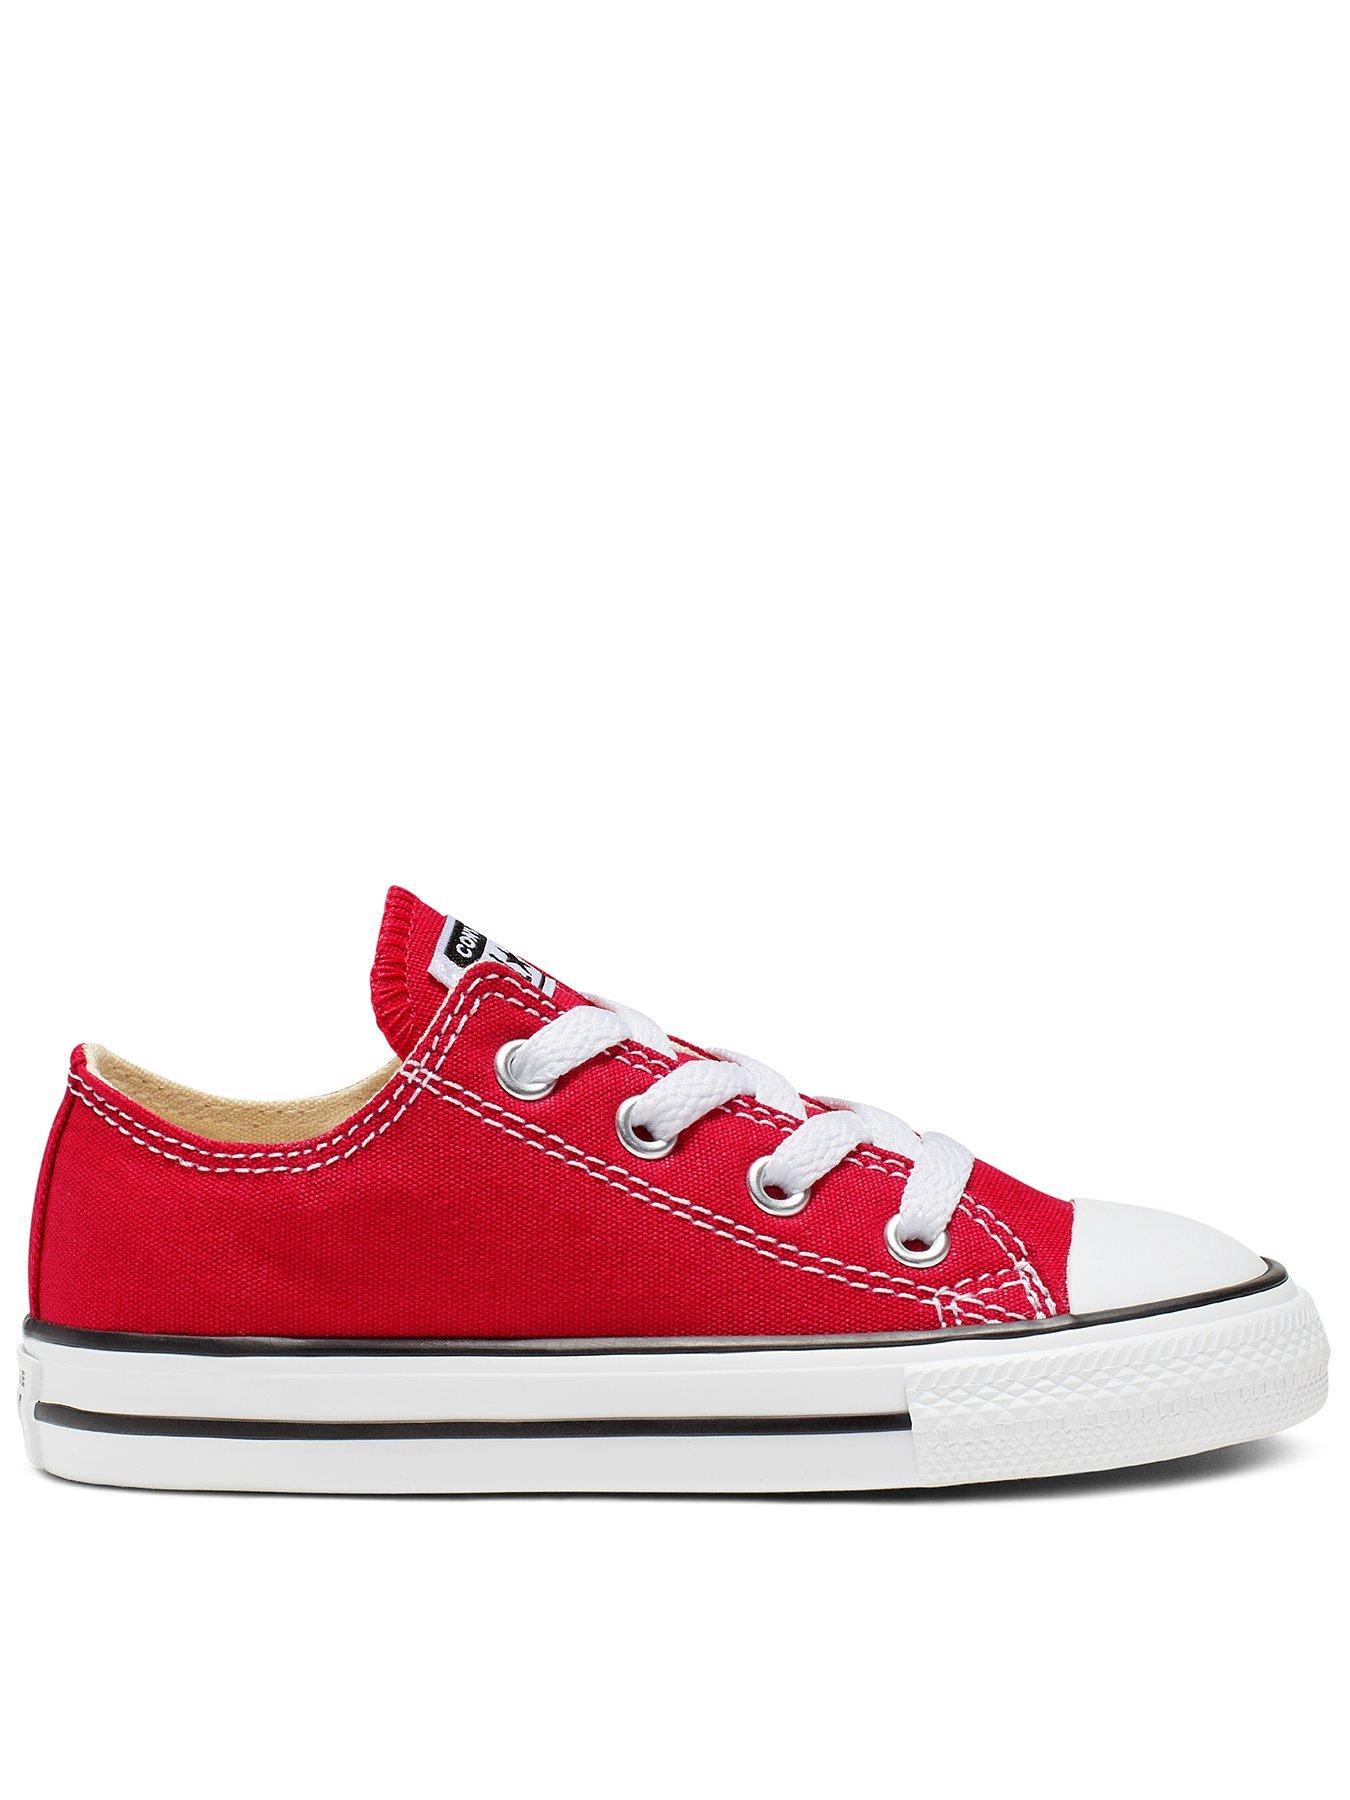 Red | Converse Child & baby | www.very.co.uk